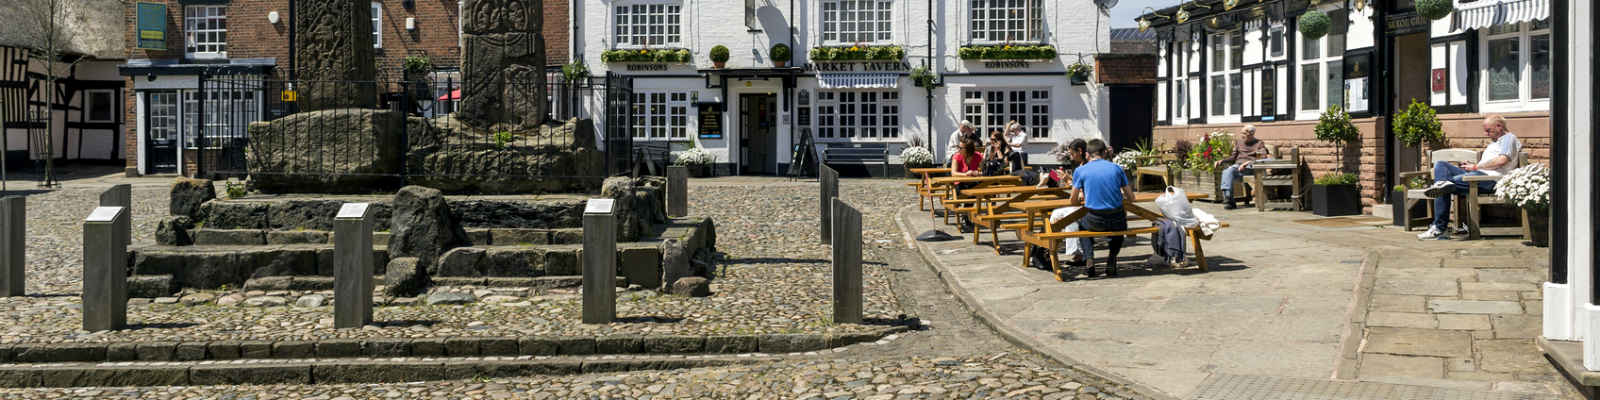 View of Sandbach town square, Cheshire. Two Anglo Saxon crosses can be seen and people can be seen sitting outside a public house.